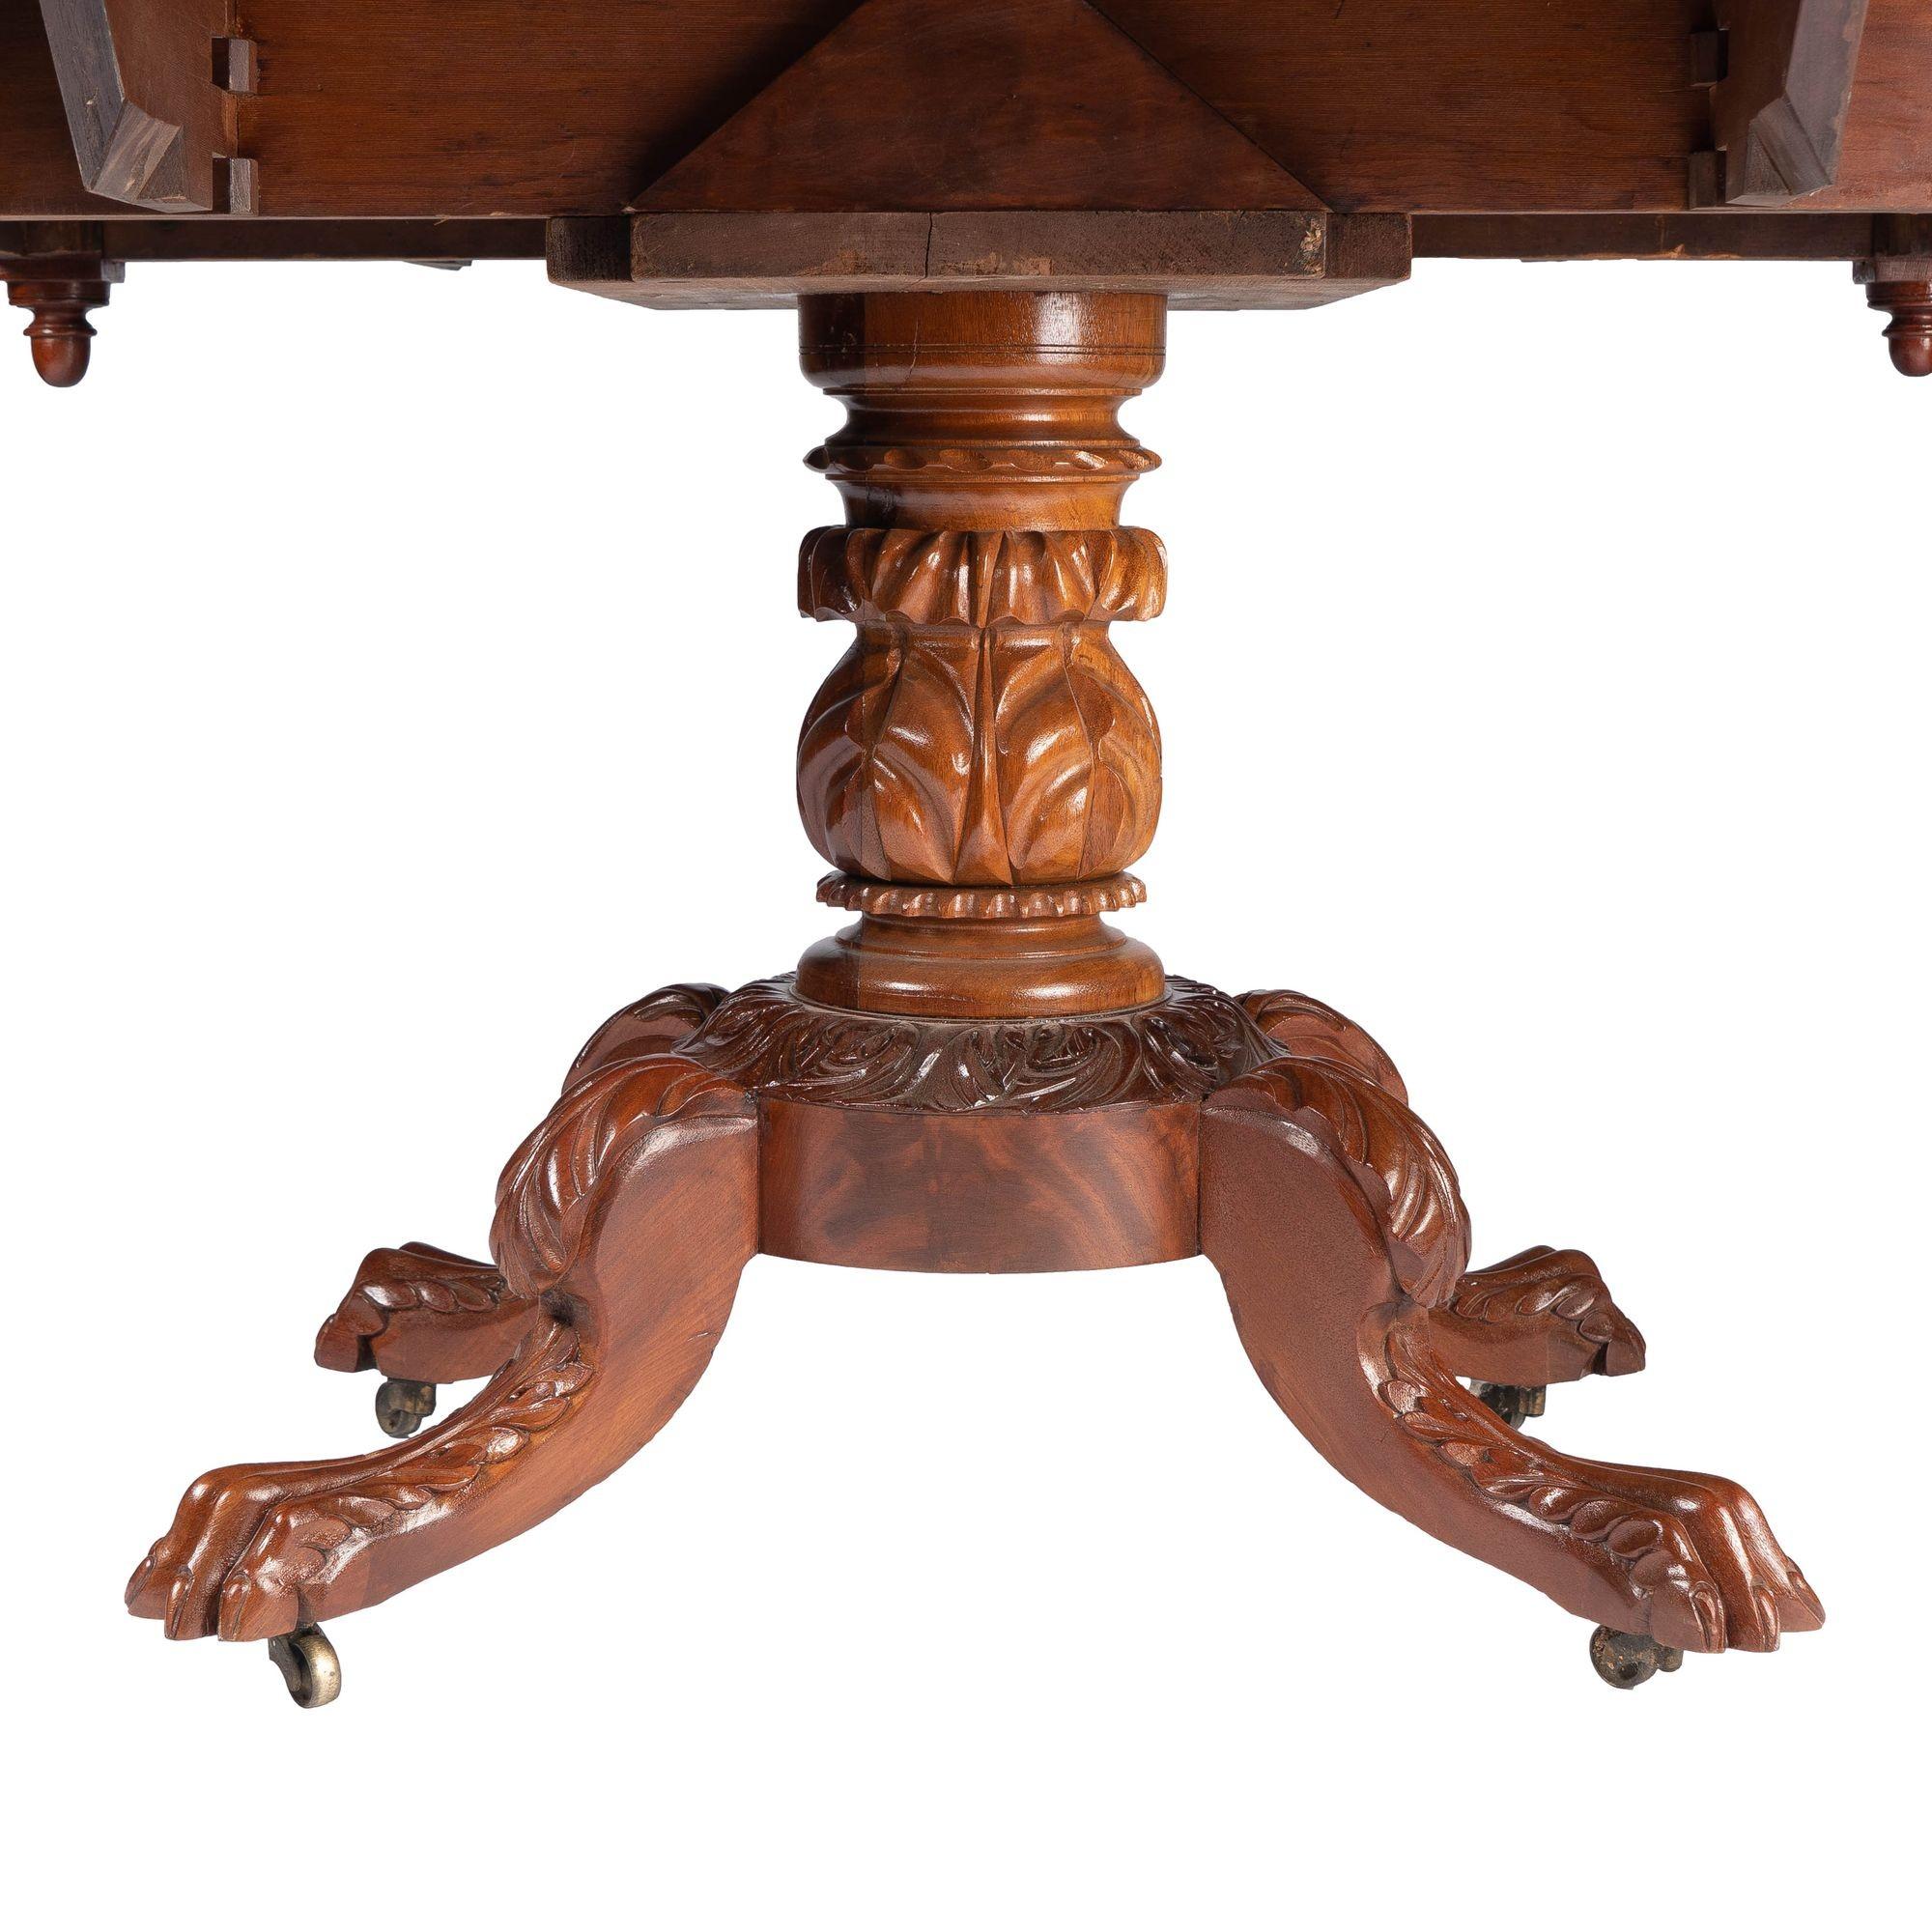 New York Neoclassic Drop Leaf Breakfast Table, c. 1825 For Sale 2